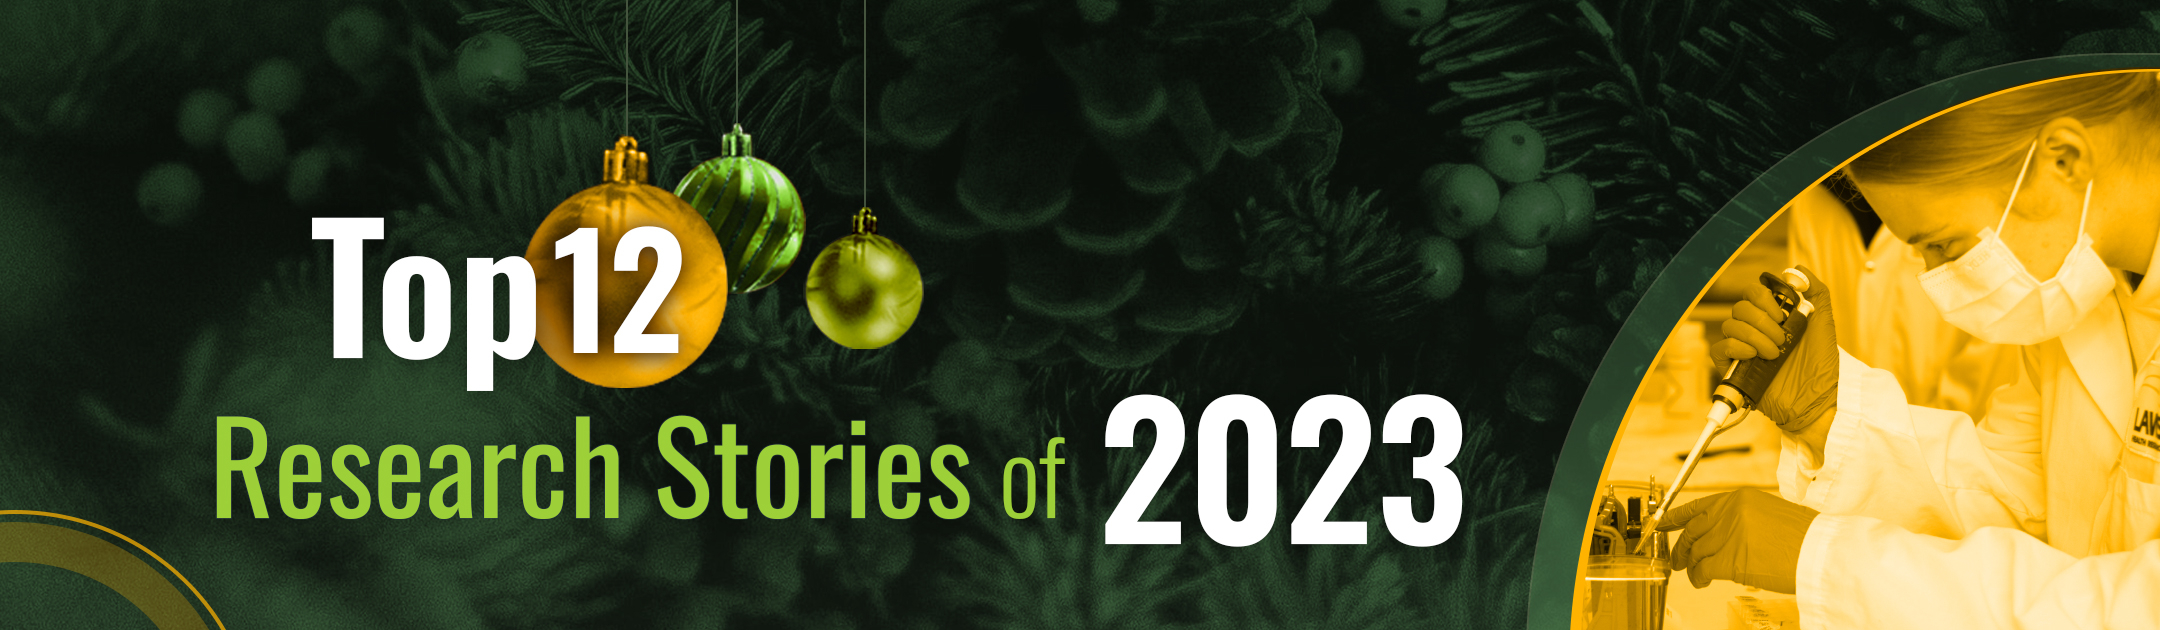 Top 12 Research Stories of 2023